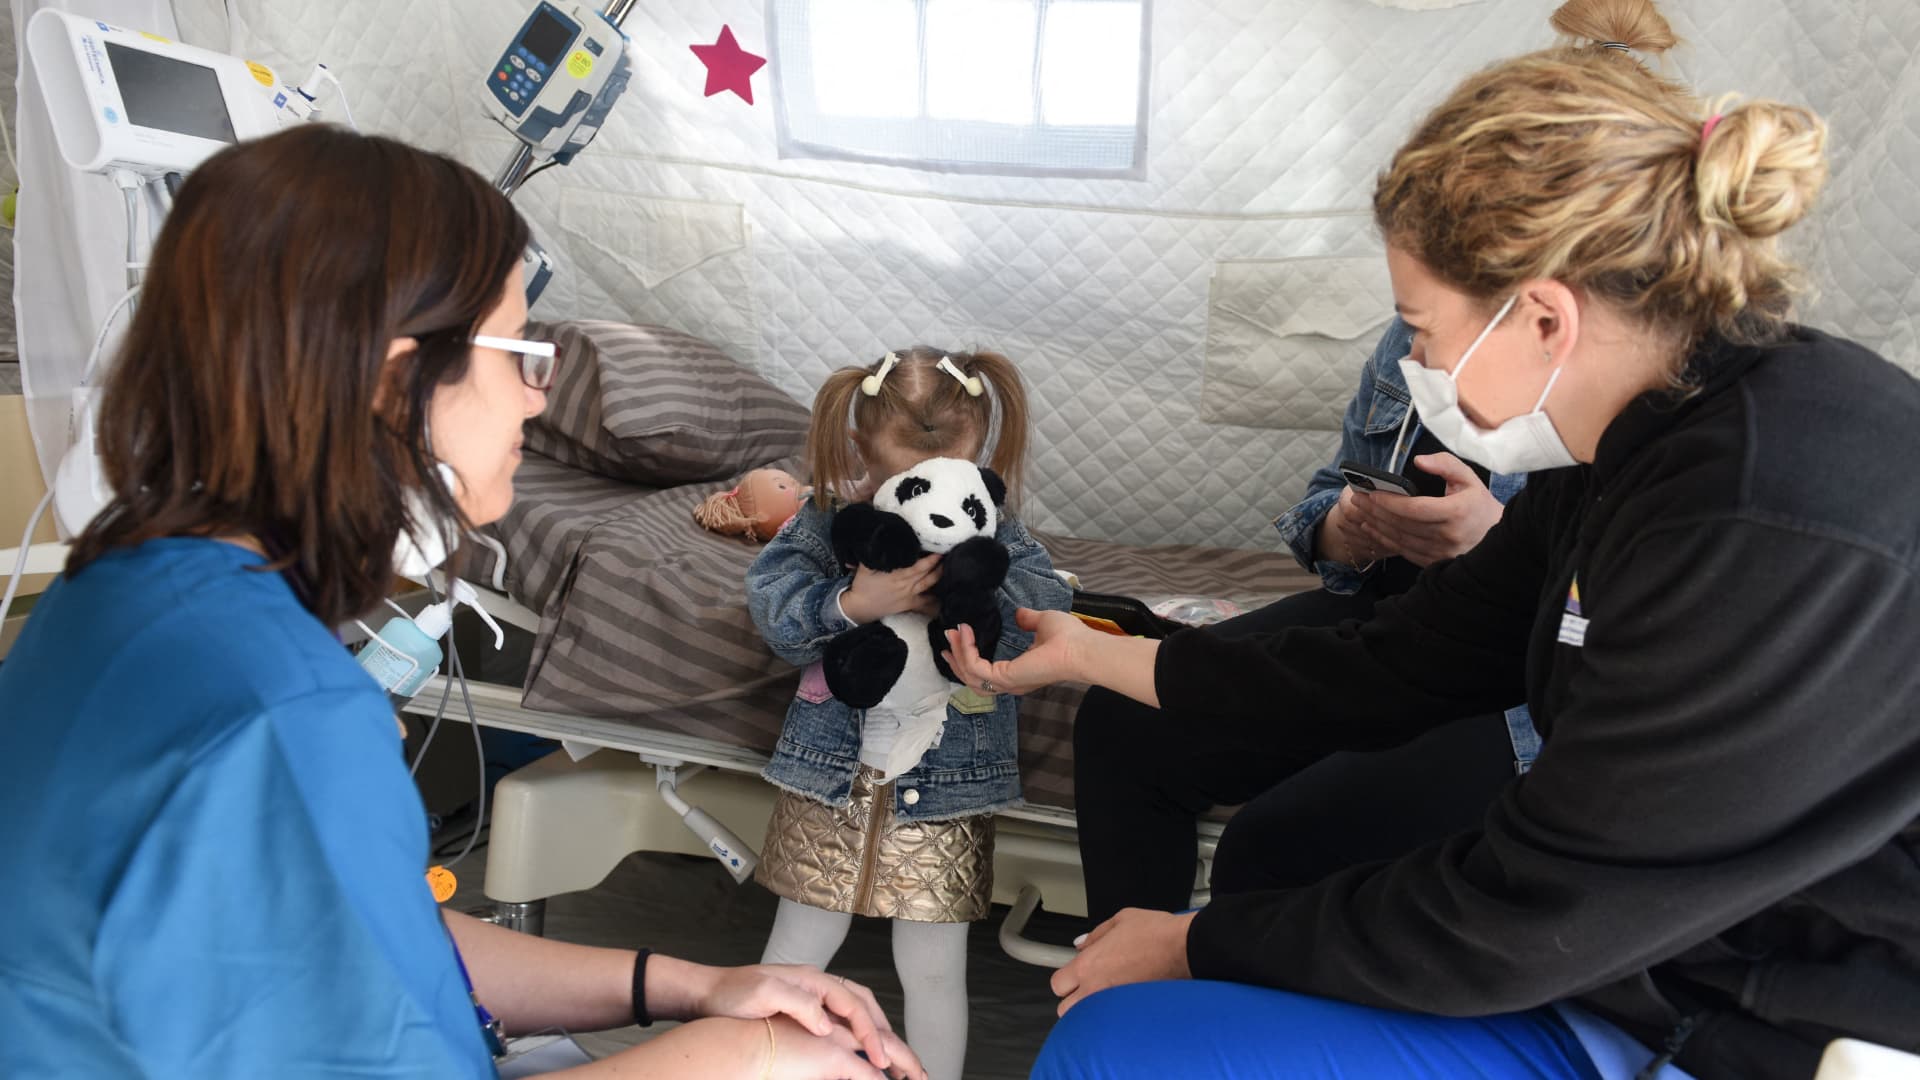 Medical workers tend to a children at Israeli field hospital, in Mostyska near the Polish border, in Lviv, western Ukraine, on March 23, 2022.ISRAEL - Israeli field hospital provide assistance to migrants and residents of Lviv.